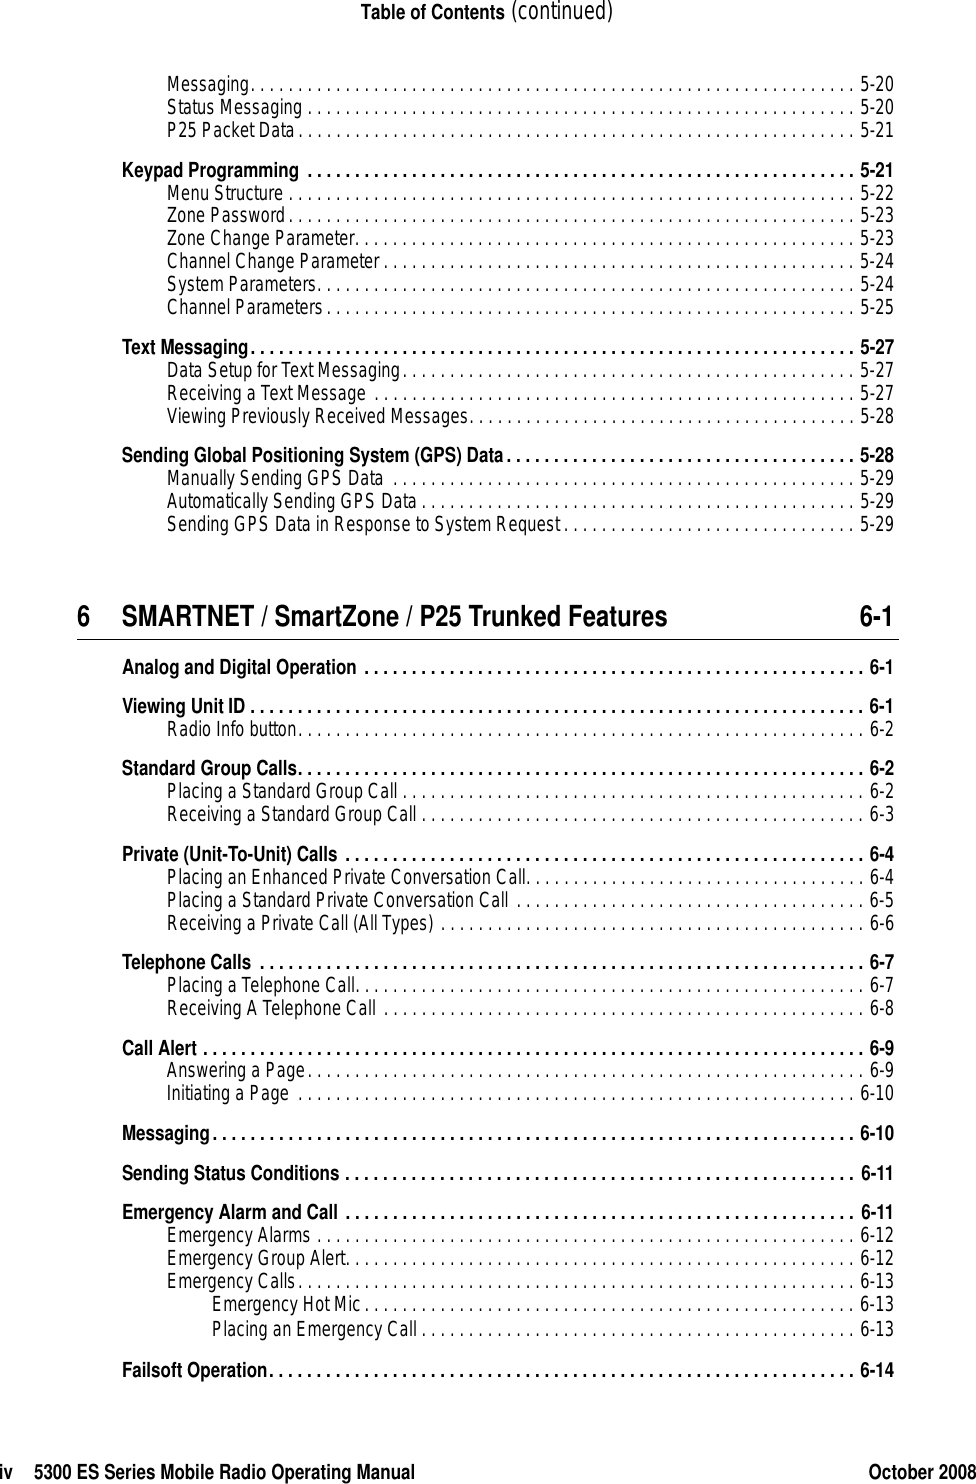 iv 5300 ES Series Mobile Radio Operating Manual October 2008Table of Contents (continued)Messaging. . . . . . . . . . . . . . . . . . . . . . . . . . . . . . . . . . . . . . . . . . . . . . . . . . . . . . . . . . . . . . . . 5-20Status Messaging . . . . . . . . . . . . . . . . . . . . . . . . . . . . . . . . . . . . . . . . . . . . . . . . . . . . . . . . . . 5-20P25 Packet Data. . . . . . . . . . . . . . . . . . . . . . . . . . . . . . . . . . . . . . . . . . . . . . . . . . . . . . . . . . . 5-21Keypad Programming . . . . . . . . . . . . . . . . . . . . . . . . . . . . . . . . . . . . . . . . . . . . . . . . . . . . . . . . . . 5-21Menu Structure . . . . . . . . . . . . . . . . . . . . . . . . . . . . . . . . . . . . . . . . . . . . . . . . . . . . . . . . . . . . 5-22Zone Password. . . . . . . . . . . . . . . . . . . . . . . . . . . . . . . . . . . . . . . . . . . . . . . . . . . . . . . . . . . . 5-23Zone Change Parameter. . . . . . . . . . . . . . . . . . . . . . . . . . . . . . . . . . . . . . . . . . . . . . . . . . . . . 5-23Channel Change Parameter. . . . . . . . . . . . . . . . . . . . . . . . . . . . . . . . . . . . . . . . . . . . . . . . . . 5-24System Parameters. . . . . . . . . . . . . . . . . . . . . . . . . . . . . . . . . . . . . . . . . . . . . . . . . . . . . . . . . 5-24Channel Parameters. . . . . . . . . . . . . . . . . . . . . . . . . . . . . . . . . . . . . . . . . . . . . . . . . . . . . . . . 5-25Text Messaging. . . . . . . . . . . . . . . . . . . . . . . . . . . . . . . . . . . . . . . . . . . . . . . . . . . . . . . . . . . . . . . . 5-27Data Setup for Text Messaging. . . . . . . . . . . . . . . . . . . . . . . . . . . . . . . . . . . . . . . . . . . . . . . . 5-27Receiving a Text Message . . . . . . . . . . . . . . . . . . . . . . . . . . . . . . . . . . . . . . . . . . . . . . . . . . . 5-27Viewing Previously Received Messages. . . . . . . . . . . . . . . . . . . . . . . . . . . . . . . . . . . . . . . . . 5-28Sending Global Positioning System (GPS) Data. . . . . . . . . . . . . . . . . . . . . . . . . . . . . . . . . . . . . 5-28Manually Sending GPS Data  . . . . . . . . . . . . . . . . . . . . . . . . . . . . . . . . . . . . . . . . . . . . . . . . . 5-29Automatically Sending GPS Data . . . . . . . . . . . . . . . . . . . . . . . . . . . . . . . . . . . . . . . . . . . . . . 5-29Sending GPS Data in Response to System Request . . . . . . . . . . . . . . . . . . . . . . . . . . . . . . . 5-296 SMARTNET / SmartZone / P25 Trunked Features 6-1Analog and Digital Operation . . . . . . . . . . . . . . . . . . . . . . . . . . . . . . . . . . . . . . . . . . . . . . . . . . . . . 6-1Viewing Unit ID . . . . . . . . . . . . . . . . . . . . . . . . . . . . . . . . . . . . . . . . . . . . . . . . . . . . . . . . . . . . . . . . . 6-1Radio Info button. . . . . . . . . . . . . . . . . . . . . . . . . . . . . . . . . . . . . . . . . . . . . . . . . . . . . . . . . . . . 6-2Standard Group Calls. . . . . . . . . . . . . . . . . . . . . . . . . . . . . . . . . . . . . . . . . . . . . . . . . . . . . . . . . . . . 6-2Placing a Standard Group Call . . . . . . . . . . . . . . . . . . . . . . . . . . . . . . . . . . . . . . . . . . . . . . . . . 6-2Receiving a Standard Group Call . . . . . . . . . . . . . . . . . . . . . . . . . . . . . . . . . . . . . . . . . . . . . . . 6-3Private (Unit-To-Unit) Calls . . . . . . . . . . . . . . . . . . . . . . . . . . . . . . . . . . . . . . . . . . . . . . . . . . . . . . . 6-4Placing an Enhanced Private Conversation Call. . . . . . . . . . . . . . . . . . . . . . . . . . . . . . . . . . . . 6-4Placing a Standard Private Conversation Call . . . . . . . . . . . . . . . . . . . . . . . . . . . . . . . . . . . . . 6-5Receiving a Private Call (All Types) . . . . . . . . . . . . . . . . . . . . . . . . . . . . . . . . . . . . . . . . . . . . . 6-6Telephone Calls . . . . . . . . . . . . . . . . . . . . . . . . . . . . . . . . . . . . . . . . . . . . . . . . . . . . . . . . . . . . . . . . 6-7Placing a Telephone Call. . . . . . . . . . . . . . . . . . . . . . . . . . . . . . . . . . . . . . . . . . . . . . . . . . . . . . 6-7Receiving A Telephone Call . . . . . . . . . . . . . . . . . . . . . . . . . . . . . . . . . . . . . . . . . . . . . . . . . . . 6-8Call Alert . . . . . . . . . . . . . . . . . . . . . . . . . . . . . . . . . . . . . . . . . . . . . . . . . . . . . . . . . . . . . . . . . . . . . . 6-9Answering a Page. . . . . . . . . . . . . . . . . . . . . . . . . . . . . . . . . . . . . . . . . . . . . . . . . . . . . . . . . . . 6-9Initiating a Page . . . . . . . . . . . . . . . . . . . . . . . . . . . . . . . . . . . . . . . . . . . . . . . . . . . . . . . . . . . 6-10Messaging. . . . . . . . . . . . . . . . . . . . . . . . . . . . . . . . . . . . . . . . . . . . . . . . . . . . . . . . . . . . . . . . . . . . 6-10Sending Status Conditions . . . . . . . . . . . . . . . . . . . . . . . . . . . . . . . . . . . . . . . . . . . . . . . . . . . . . . 6-11Emergency Alarm and Call . . . . . . . . . . . . . . . . . . . . . . . . . . . . . . . . . . . . . . . . . . . . . . . . . . . . . . 6-11Emergency Alarms . . . . . . . . . . . . . . . . . . . . . . . . . . . . . . . . . . . . . . . . . . . . . . . . . . . . . . . . . 6-12Emergency Group Alert. . . . . . . . . . . . . . . . . . . . . . . . . . . . . . . . . . . . . . . . . . . . . . . . . . . . . . 6-12Emergency Calls. . . . . . . . . . . . . . . . . . . . . . . . . . . . . . . . . . . . . . . . . . . . . . . . . . . . . . . . . . . 6-13Emergency Hot Mic. . . . . . . . . . . . . . . . . . . . . . . . . . . . . . . . . . . . . . . . . . . . . . . . . . . . 6-13Placing an Emergency Call . . . . . . . . . . . . . . . . . . . . . . . . . . . . . . . . . . . . . . . . . . . . . . 6-13Failsoft Operation. . . . . . . . . . . . . . . . . . . . . . . . . . . . . . . . . . . . . . . . . . . . . . . . . . . . . . . . . . . . . . 6-14